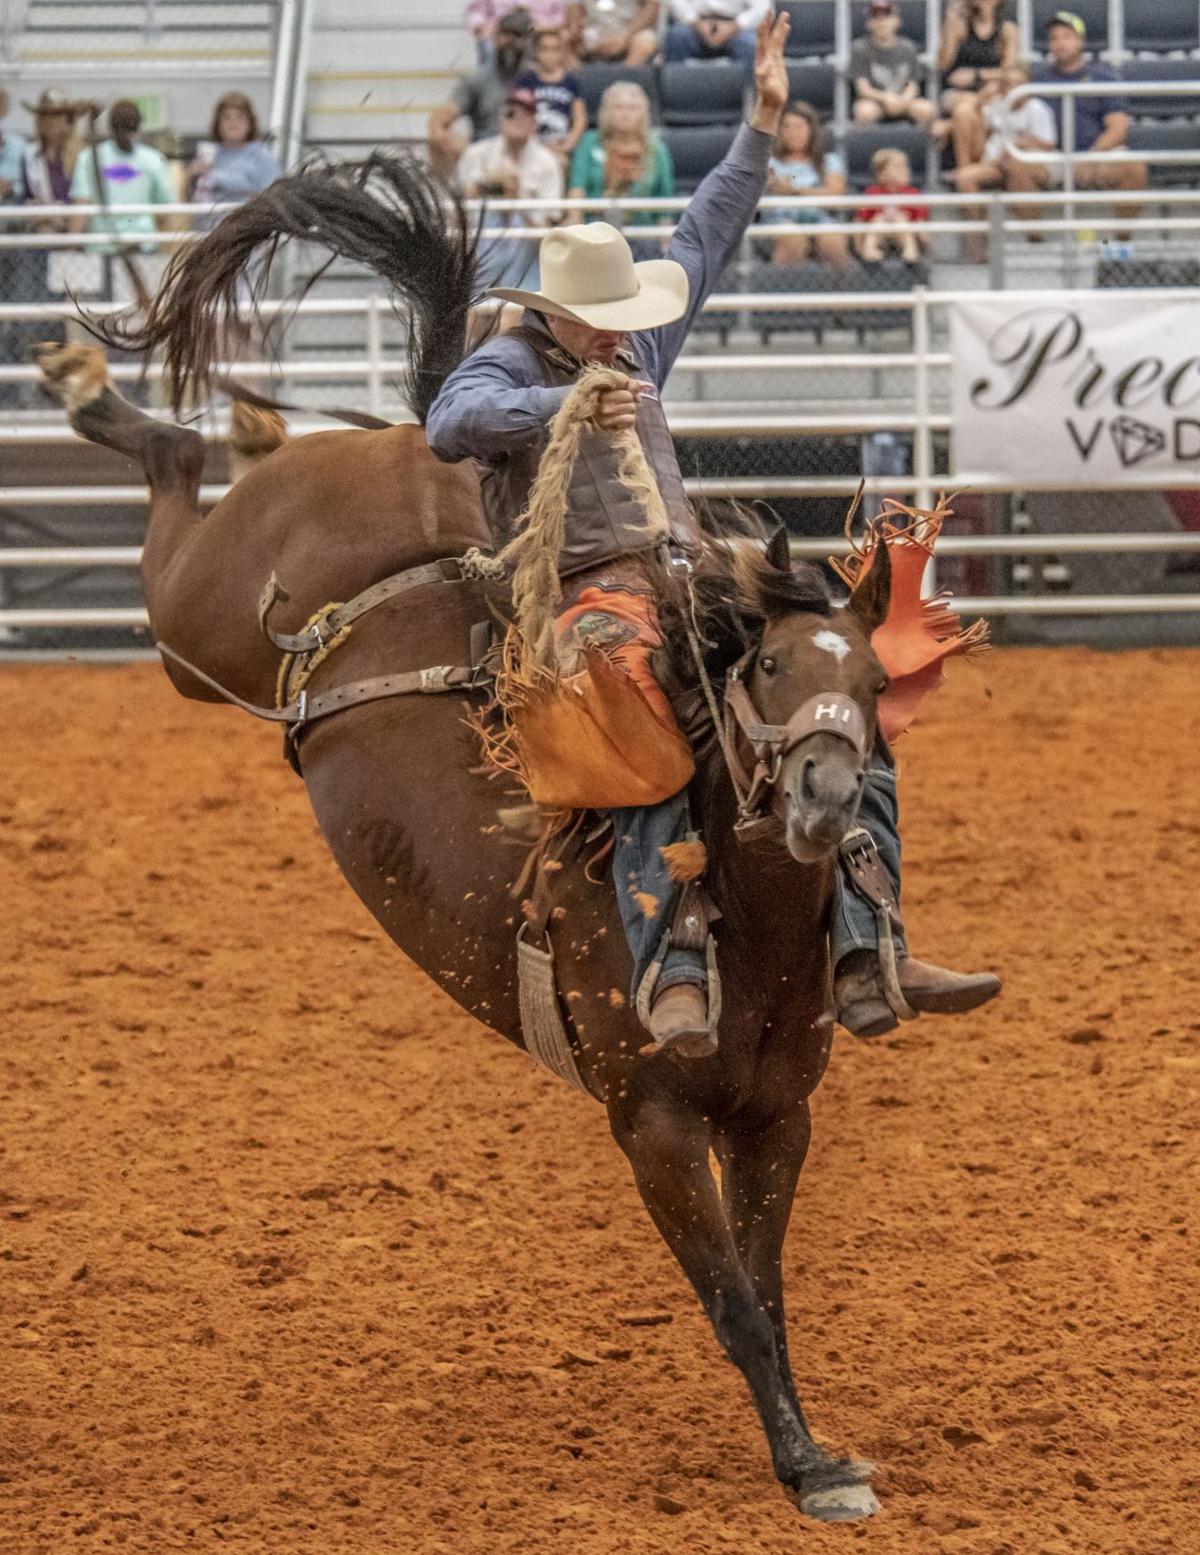 6th annual Arcadia Fall Rodeo was a top-seller | News | yoursun.com